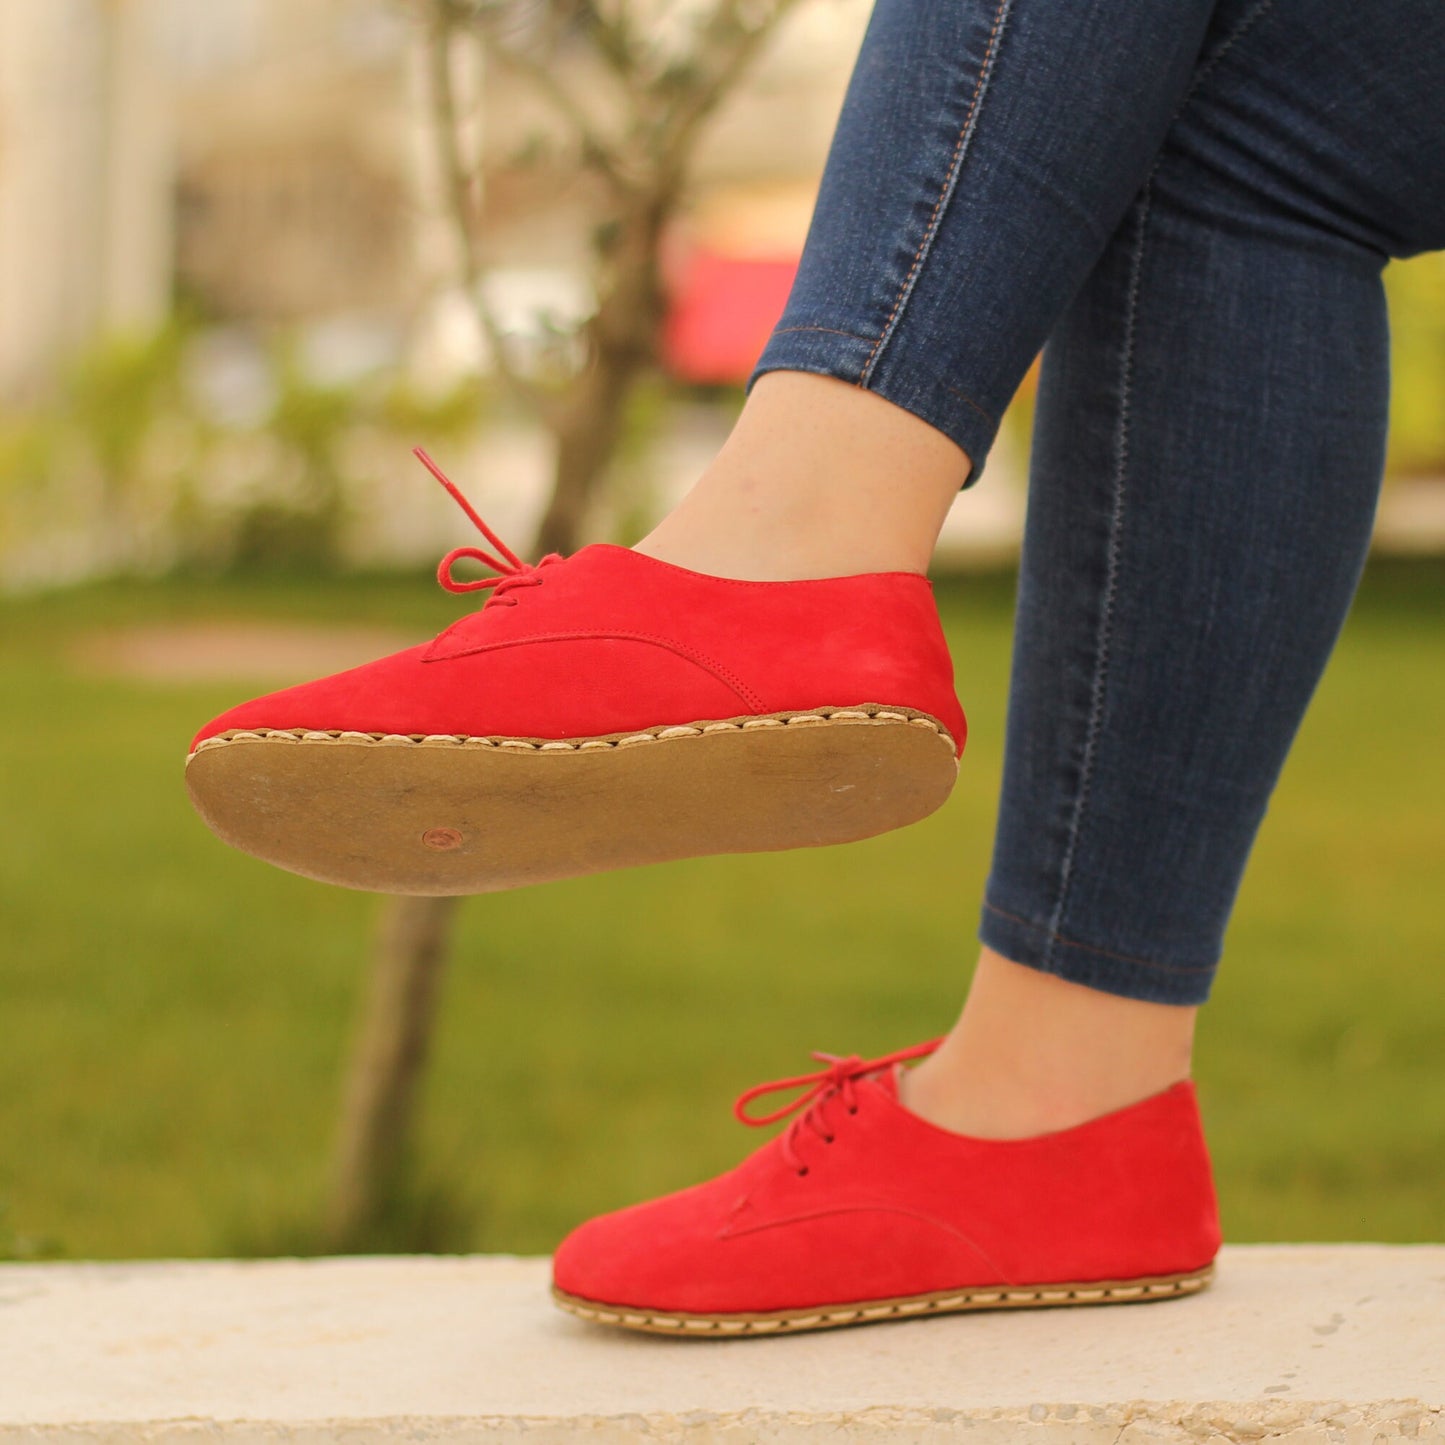 Red Nubuck Leather Barefoot Shoes for Women | Fashionable and Comfortable